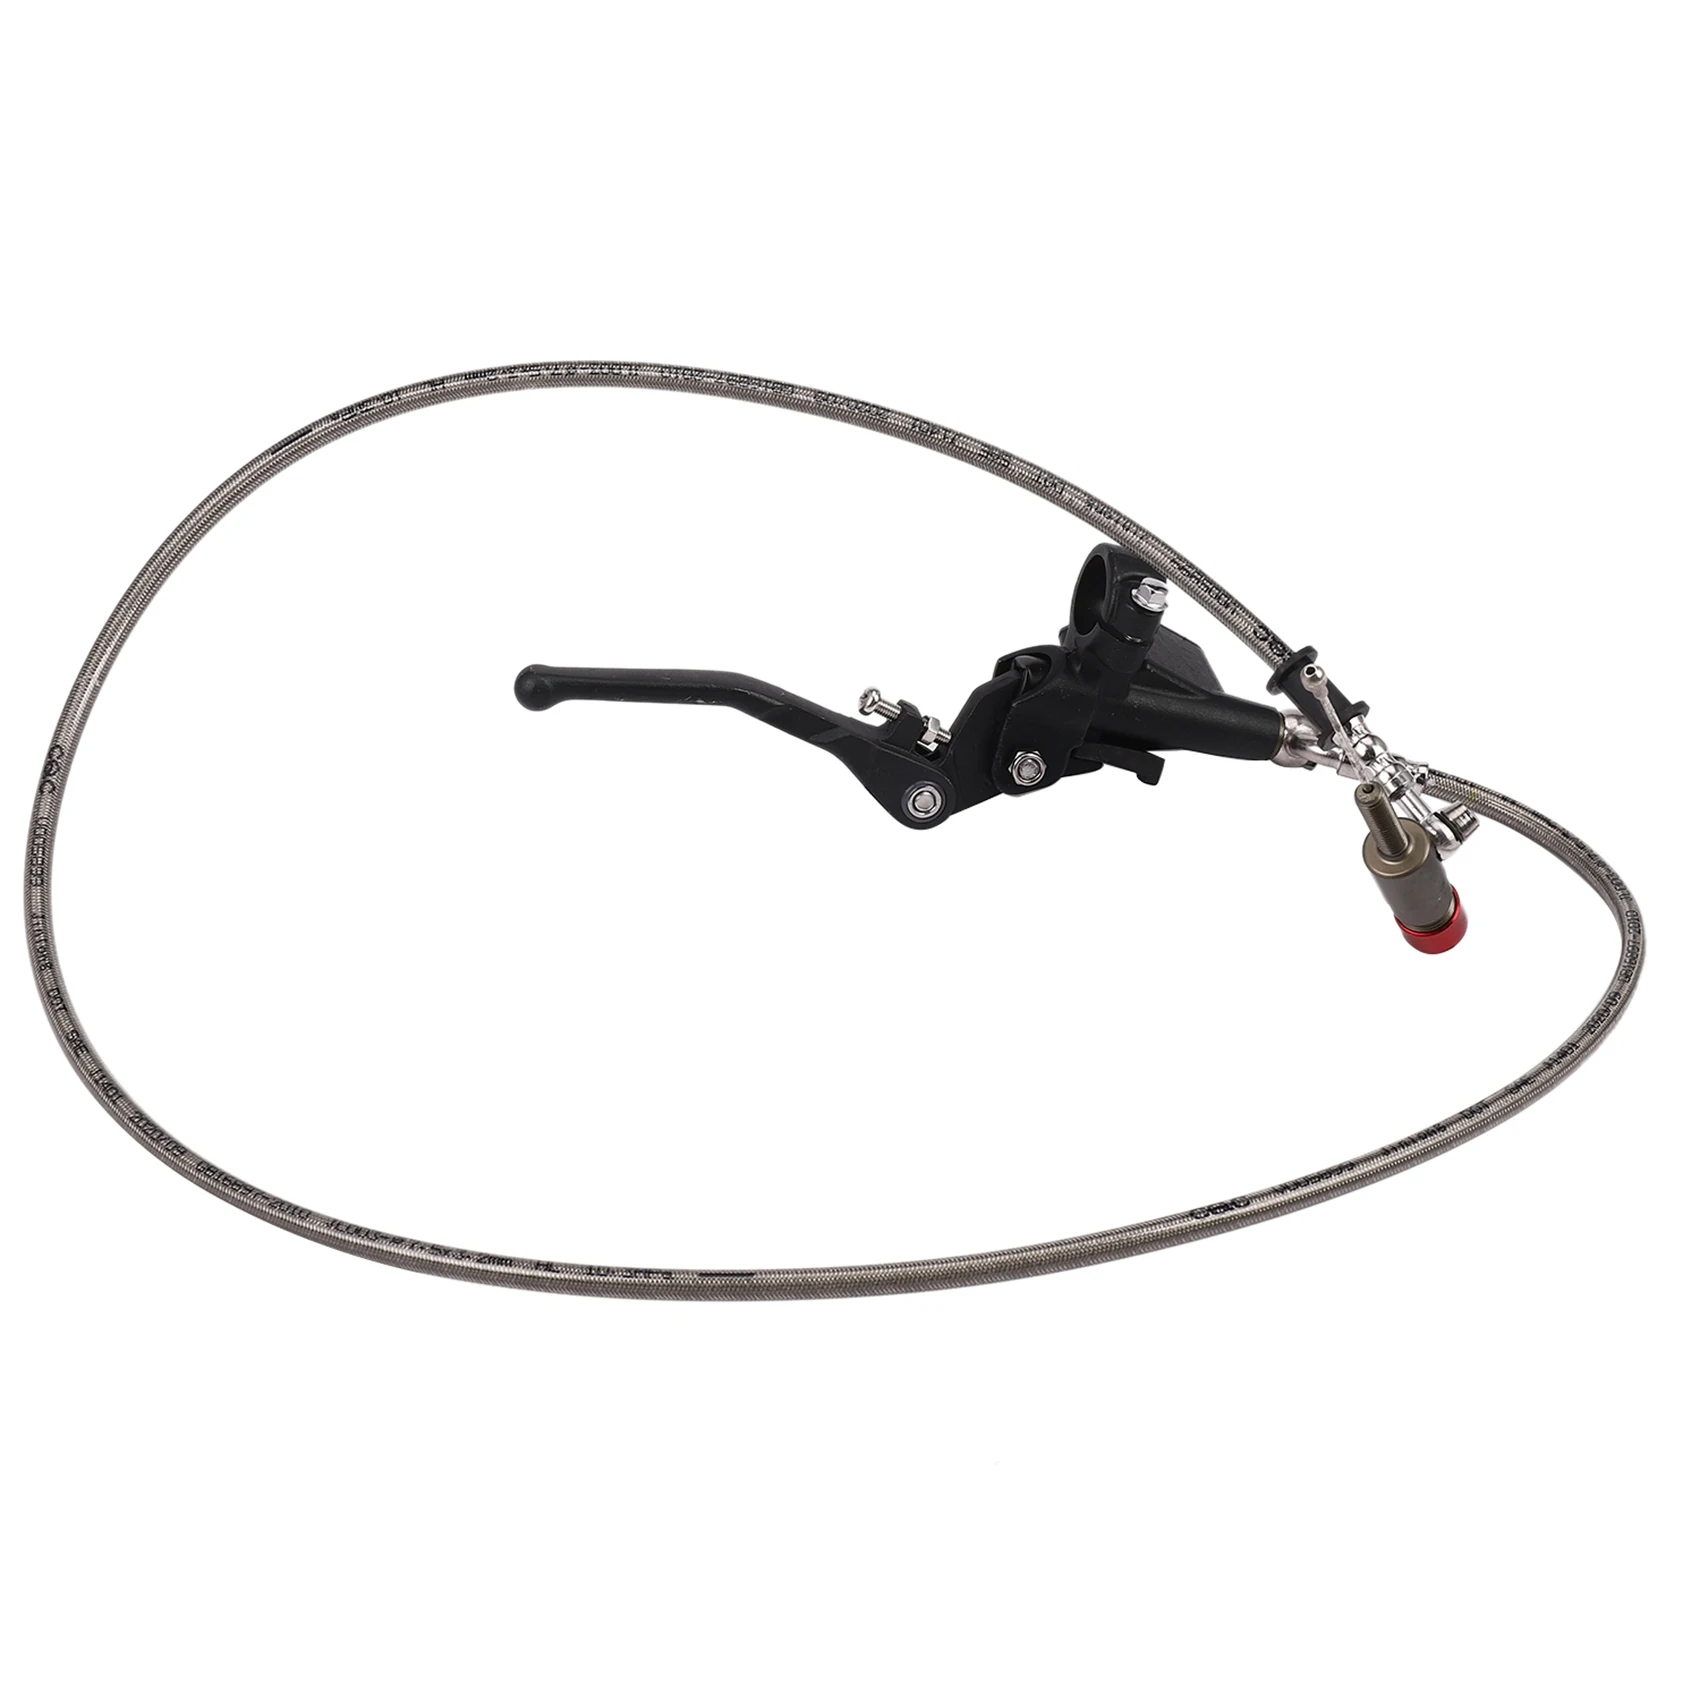 

Hydraulic Clutch 1200Mm Lever Master Cylinder for 125-250Cc Vertical Engine Motorcycle Dirt Bike Motocross